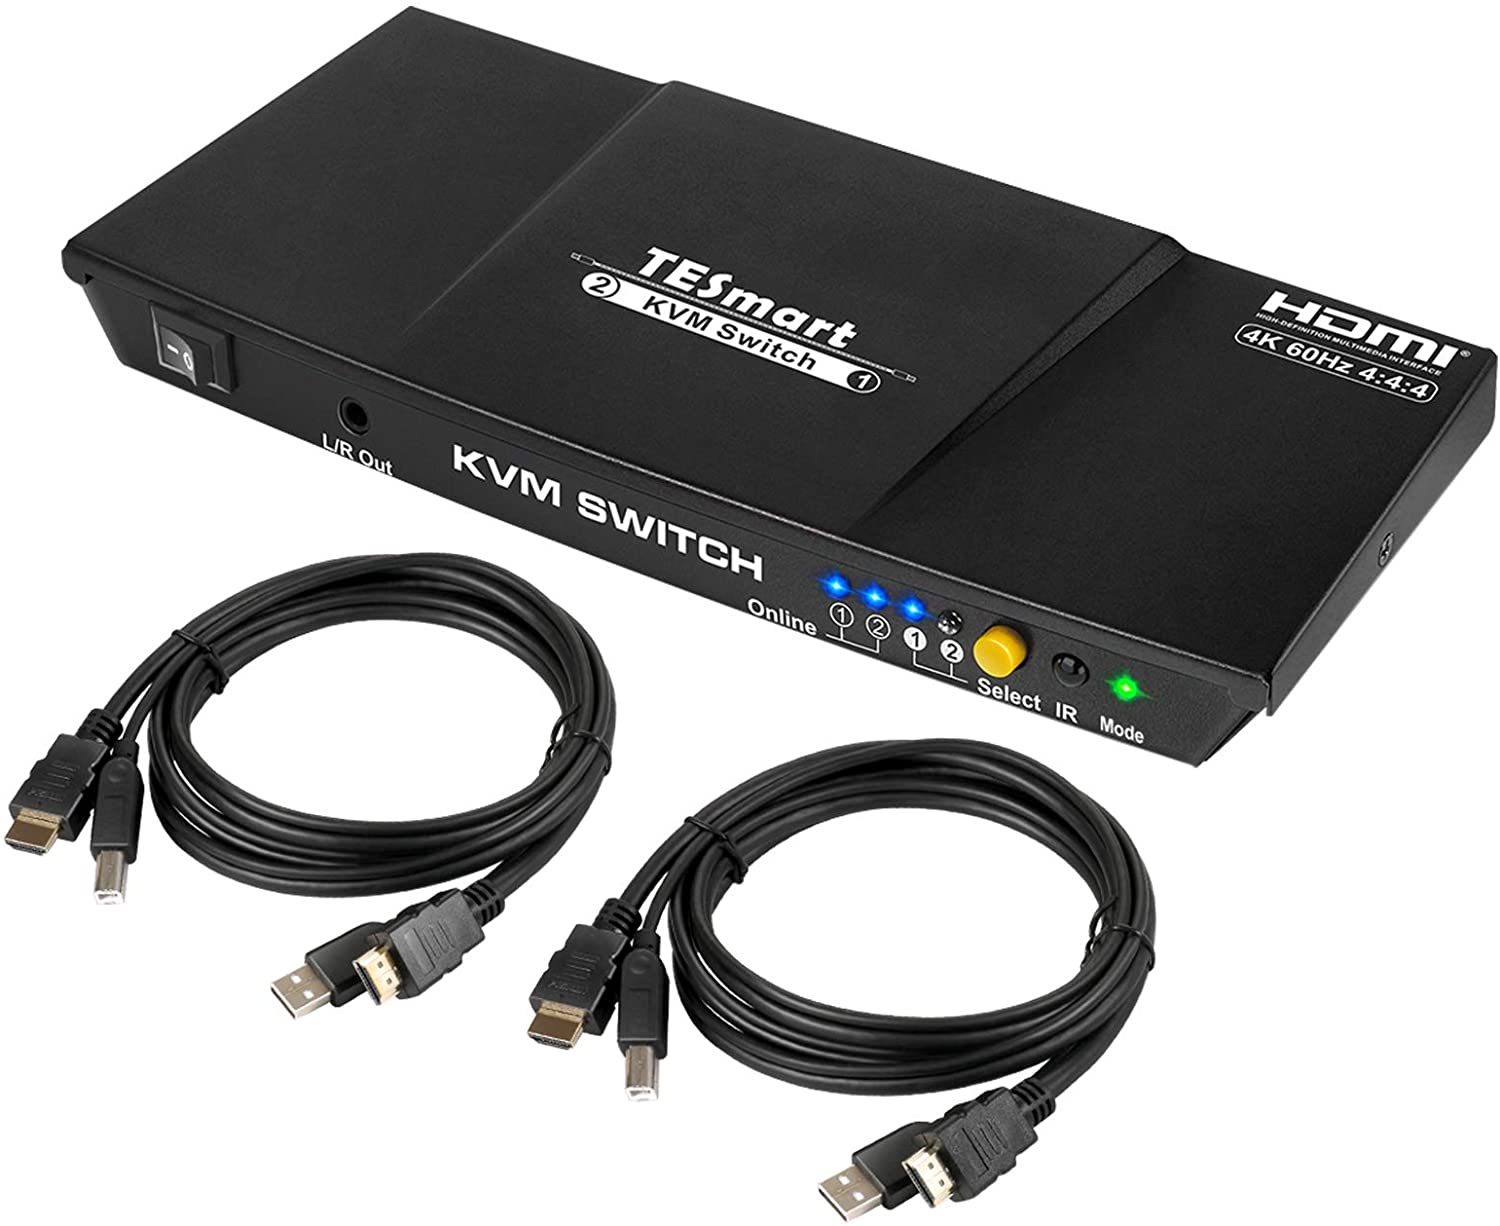 2 PORT KVM HDMI 2.0 VIDEO SWITCH FOR 1 MONITOR BETWEEN 2 COMPUTERS - 4K 60HZ – QHD 144HZ - AUDIO OUTPUT & USB SHARING – 2X1 - image 1 of 7